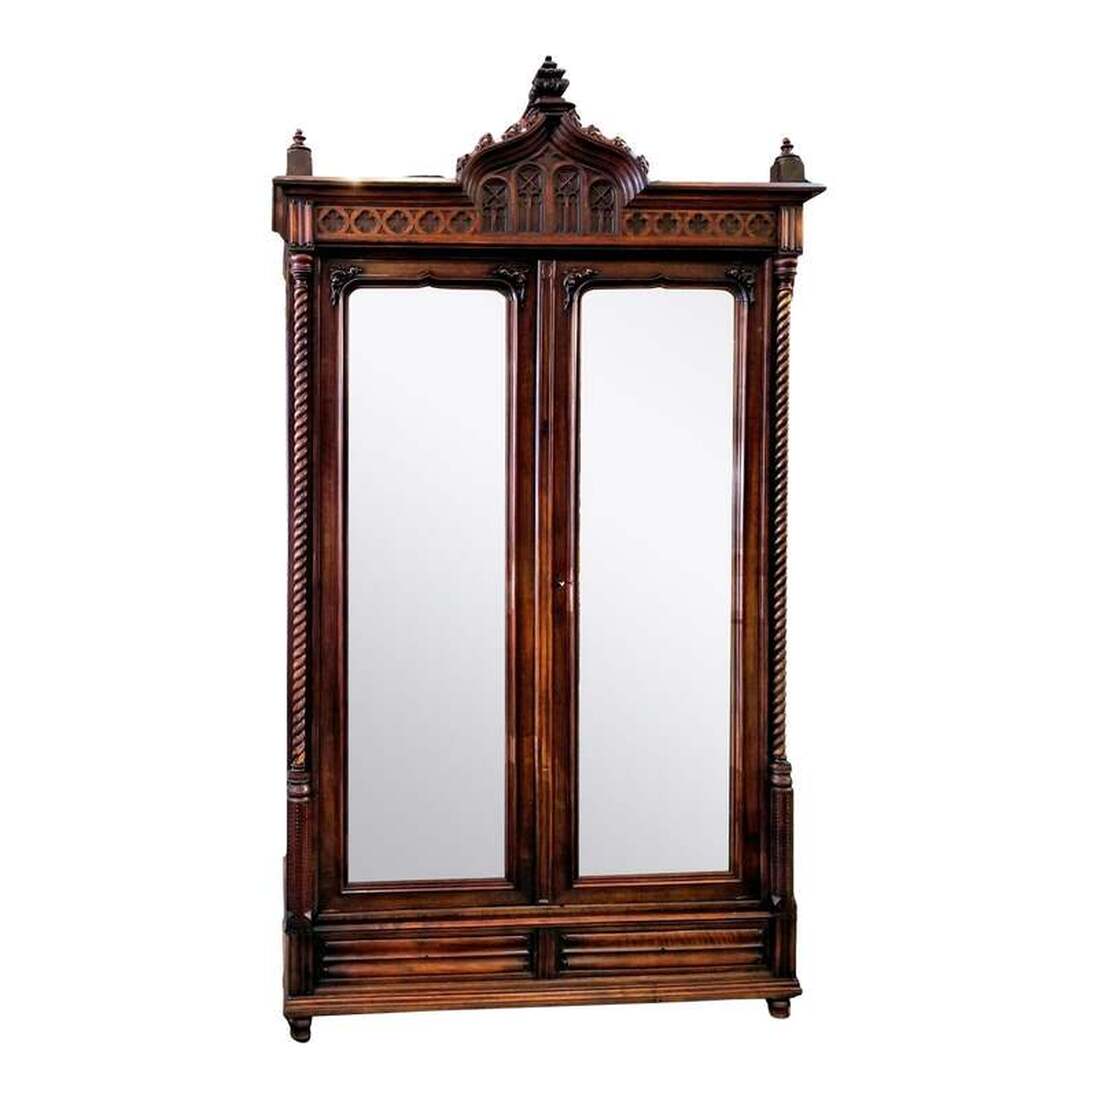 Late-Victorian ( 1896 ) armoire / wardrobe / linen press in the French Gothic style.  Built by Maison Antoine Bastet of Lyon ( ébéniste et fabricant de meubles 1864-1935 ). The House was originally established in 1845 by Andre Bastet, furniture merchant.  Antoine Bastet was a furniture maker in Lyon, France who also invented an adjustable mirror ( 1883-1905 ) and a support bra for railway travelers ( 25 April, 1902 ).  The armoire is made from walnut wood.  The decoration includes trefoils and quatrefoils on the frieze of the bonnet; sugar barley twist balusters; turned and carved finials at top; linen folds on base ends and drawer fronts; shaped front feet and block back feet; rocaille applications on bonnet and at mirror corners; flambe shapes; and beveled and shaped mirrors.  The two doors lock via a brass latch. The base drawers lock as well.  The interior has two adjustable shelves and two drawers at bottom.  The back of the armoire retains part of the original furniture label.